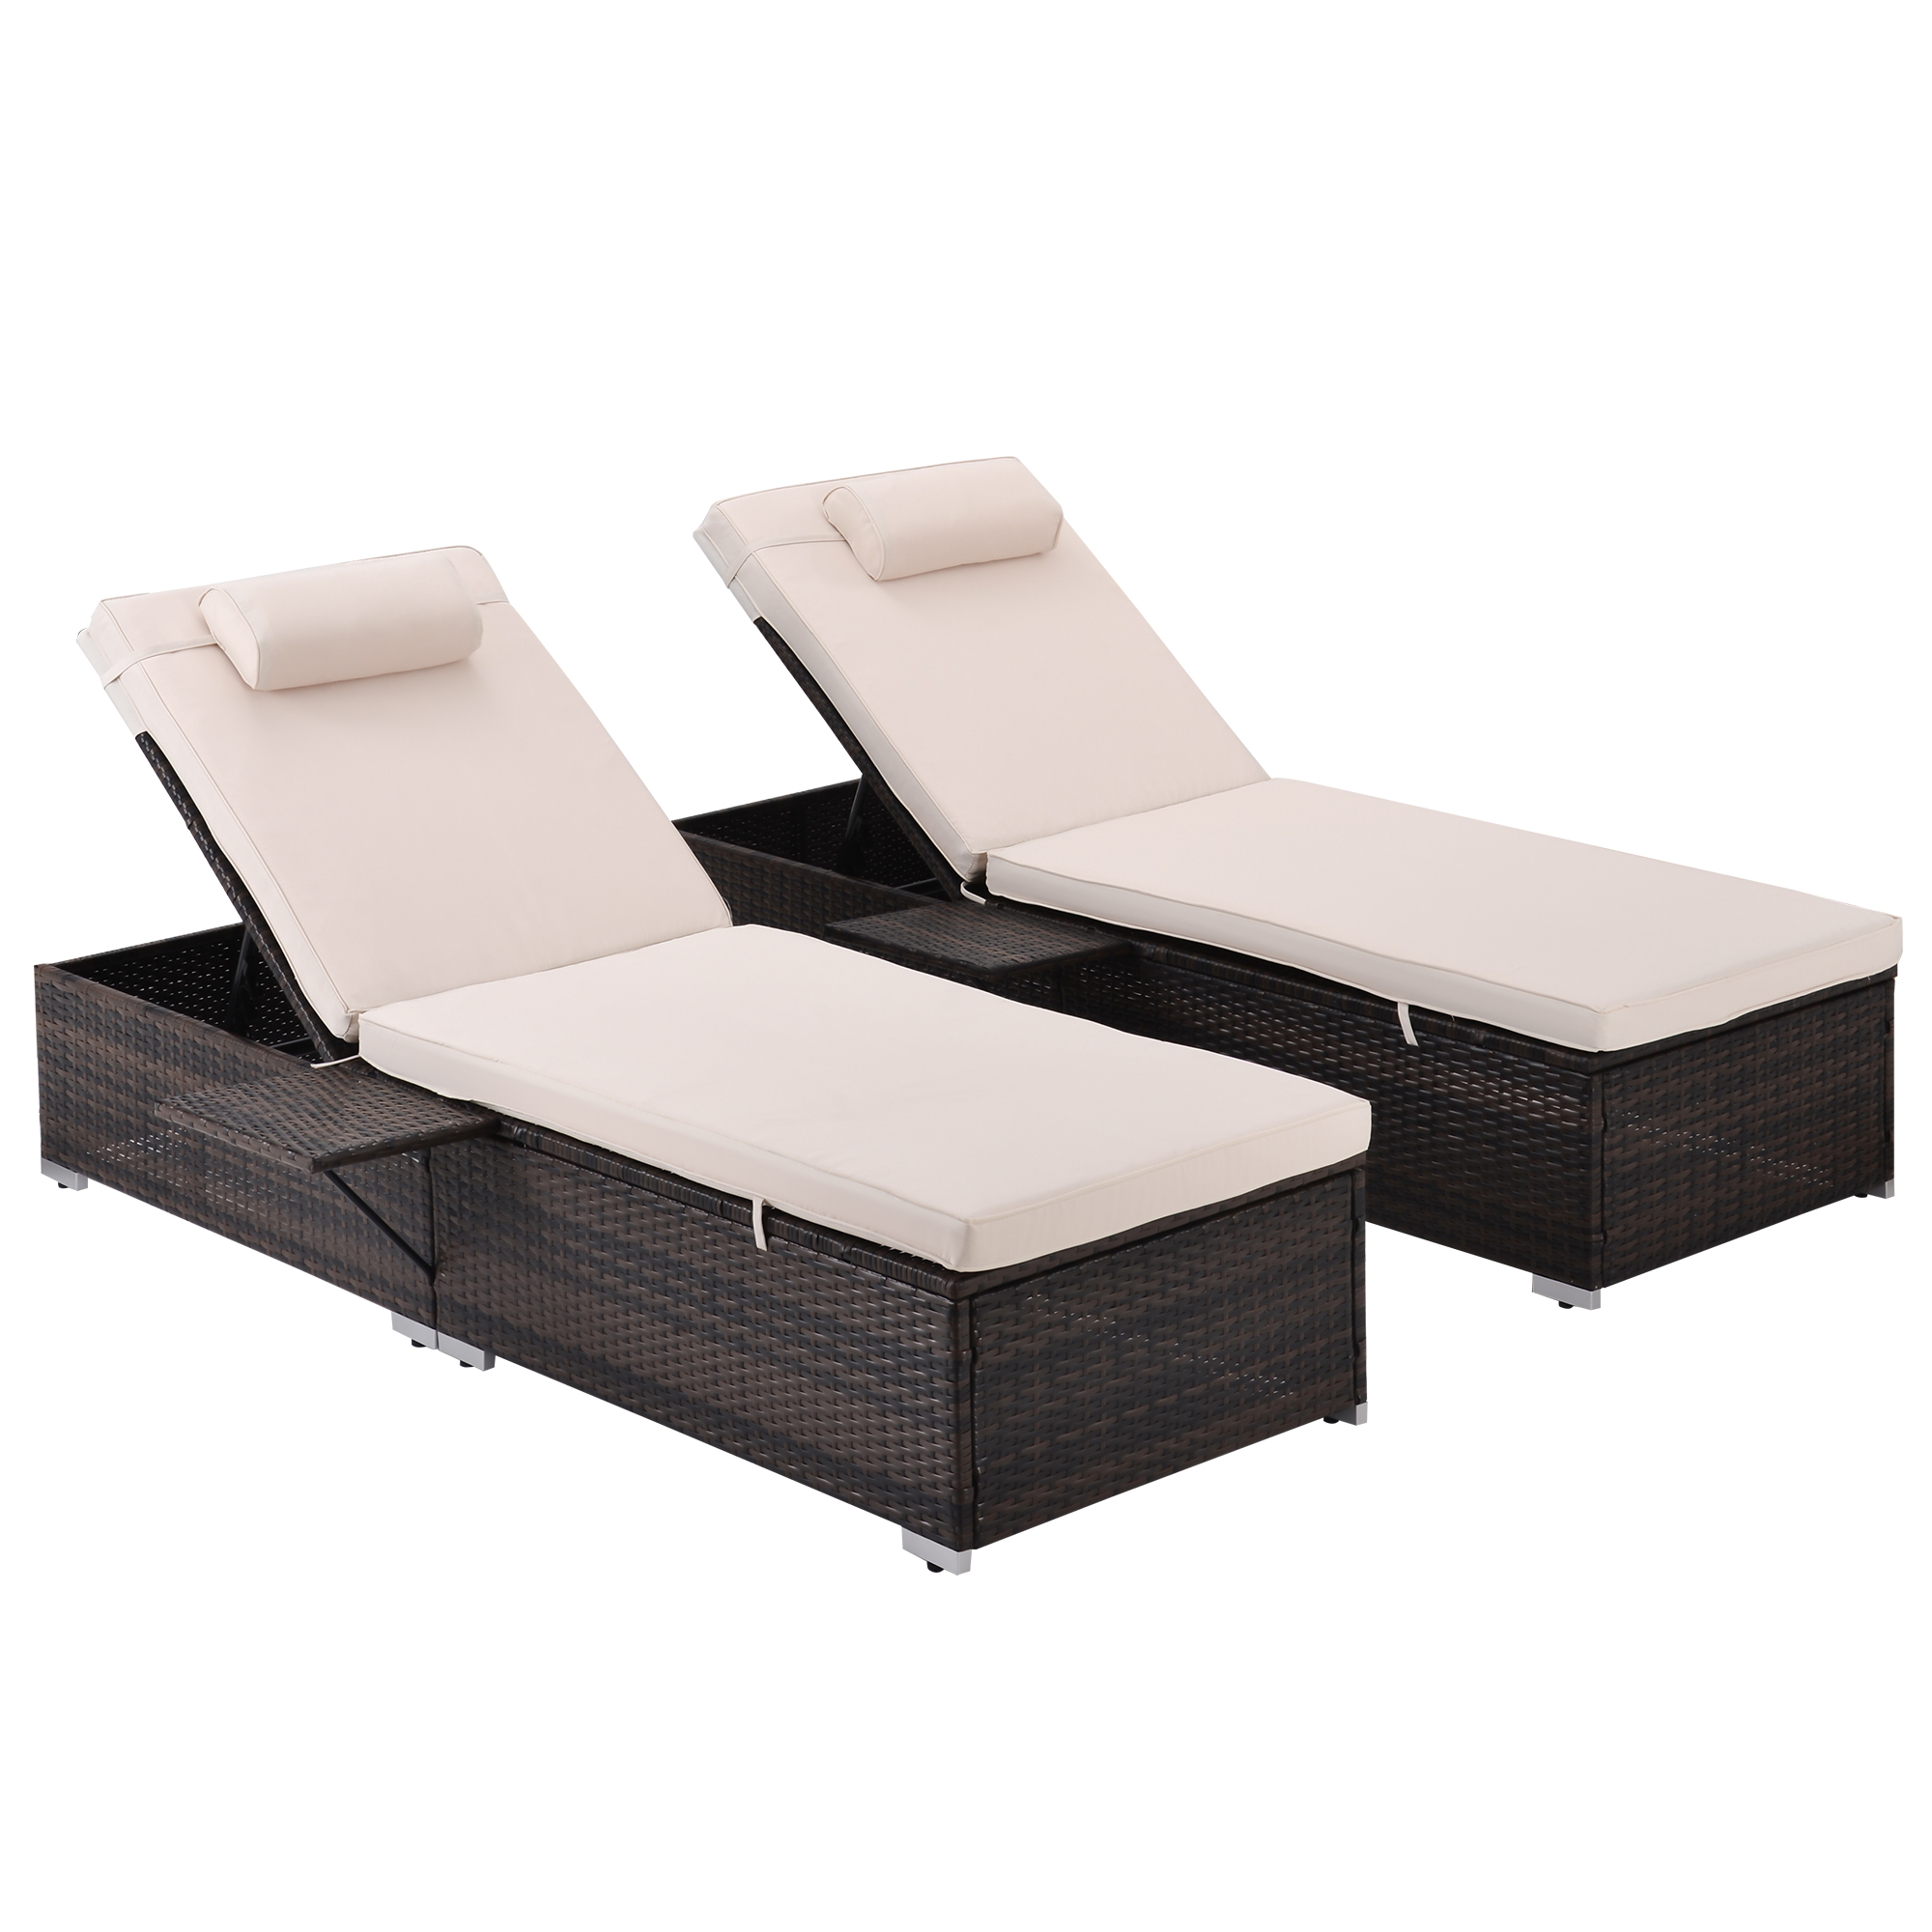 Outdoor Patio Chaise Lounge Chair Set of 2, Reclining Adjustable Pool Rattan Chaise Lounge Chair with Cushion and Side Table - Beige - image 3 of 8